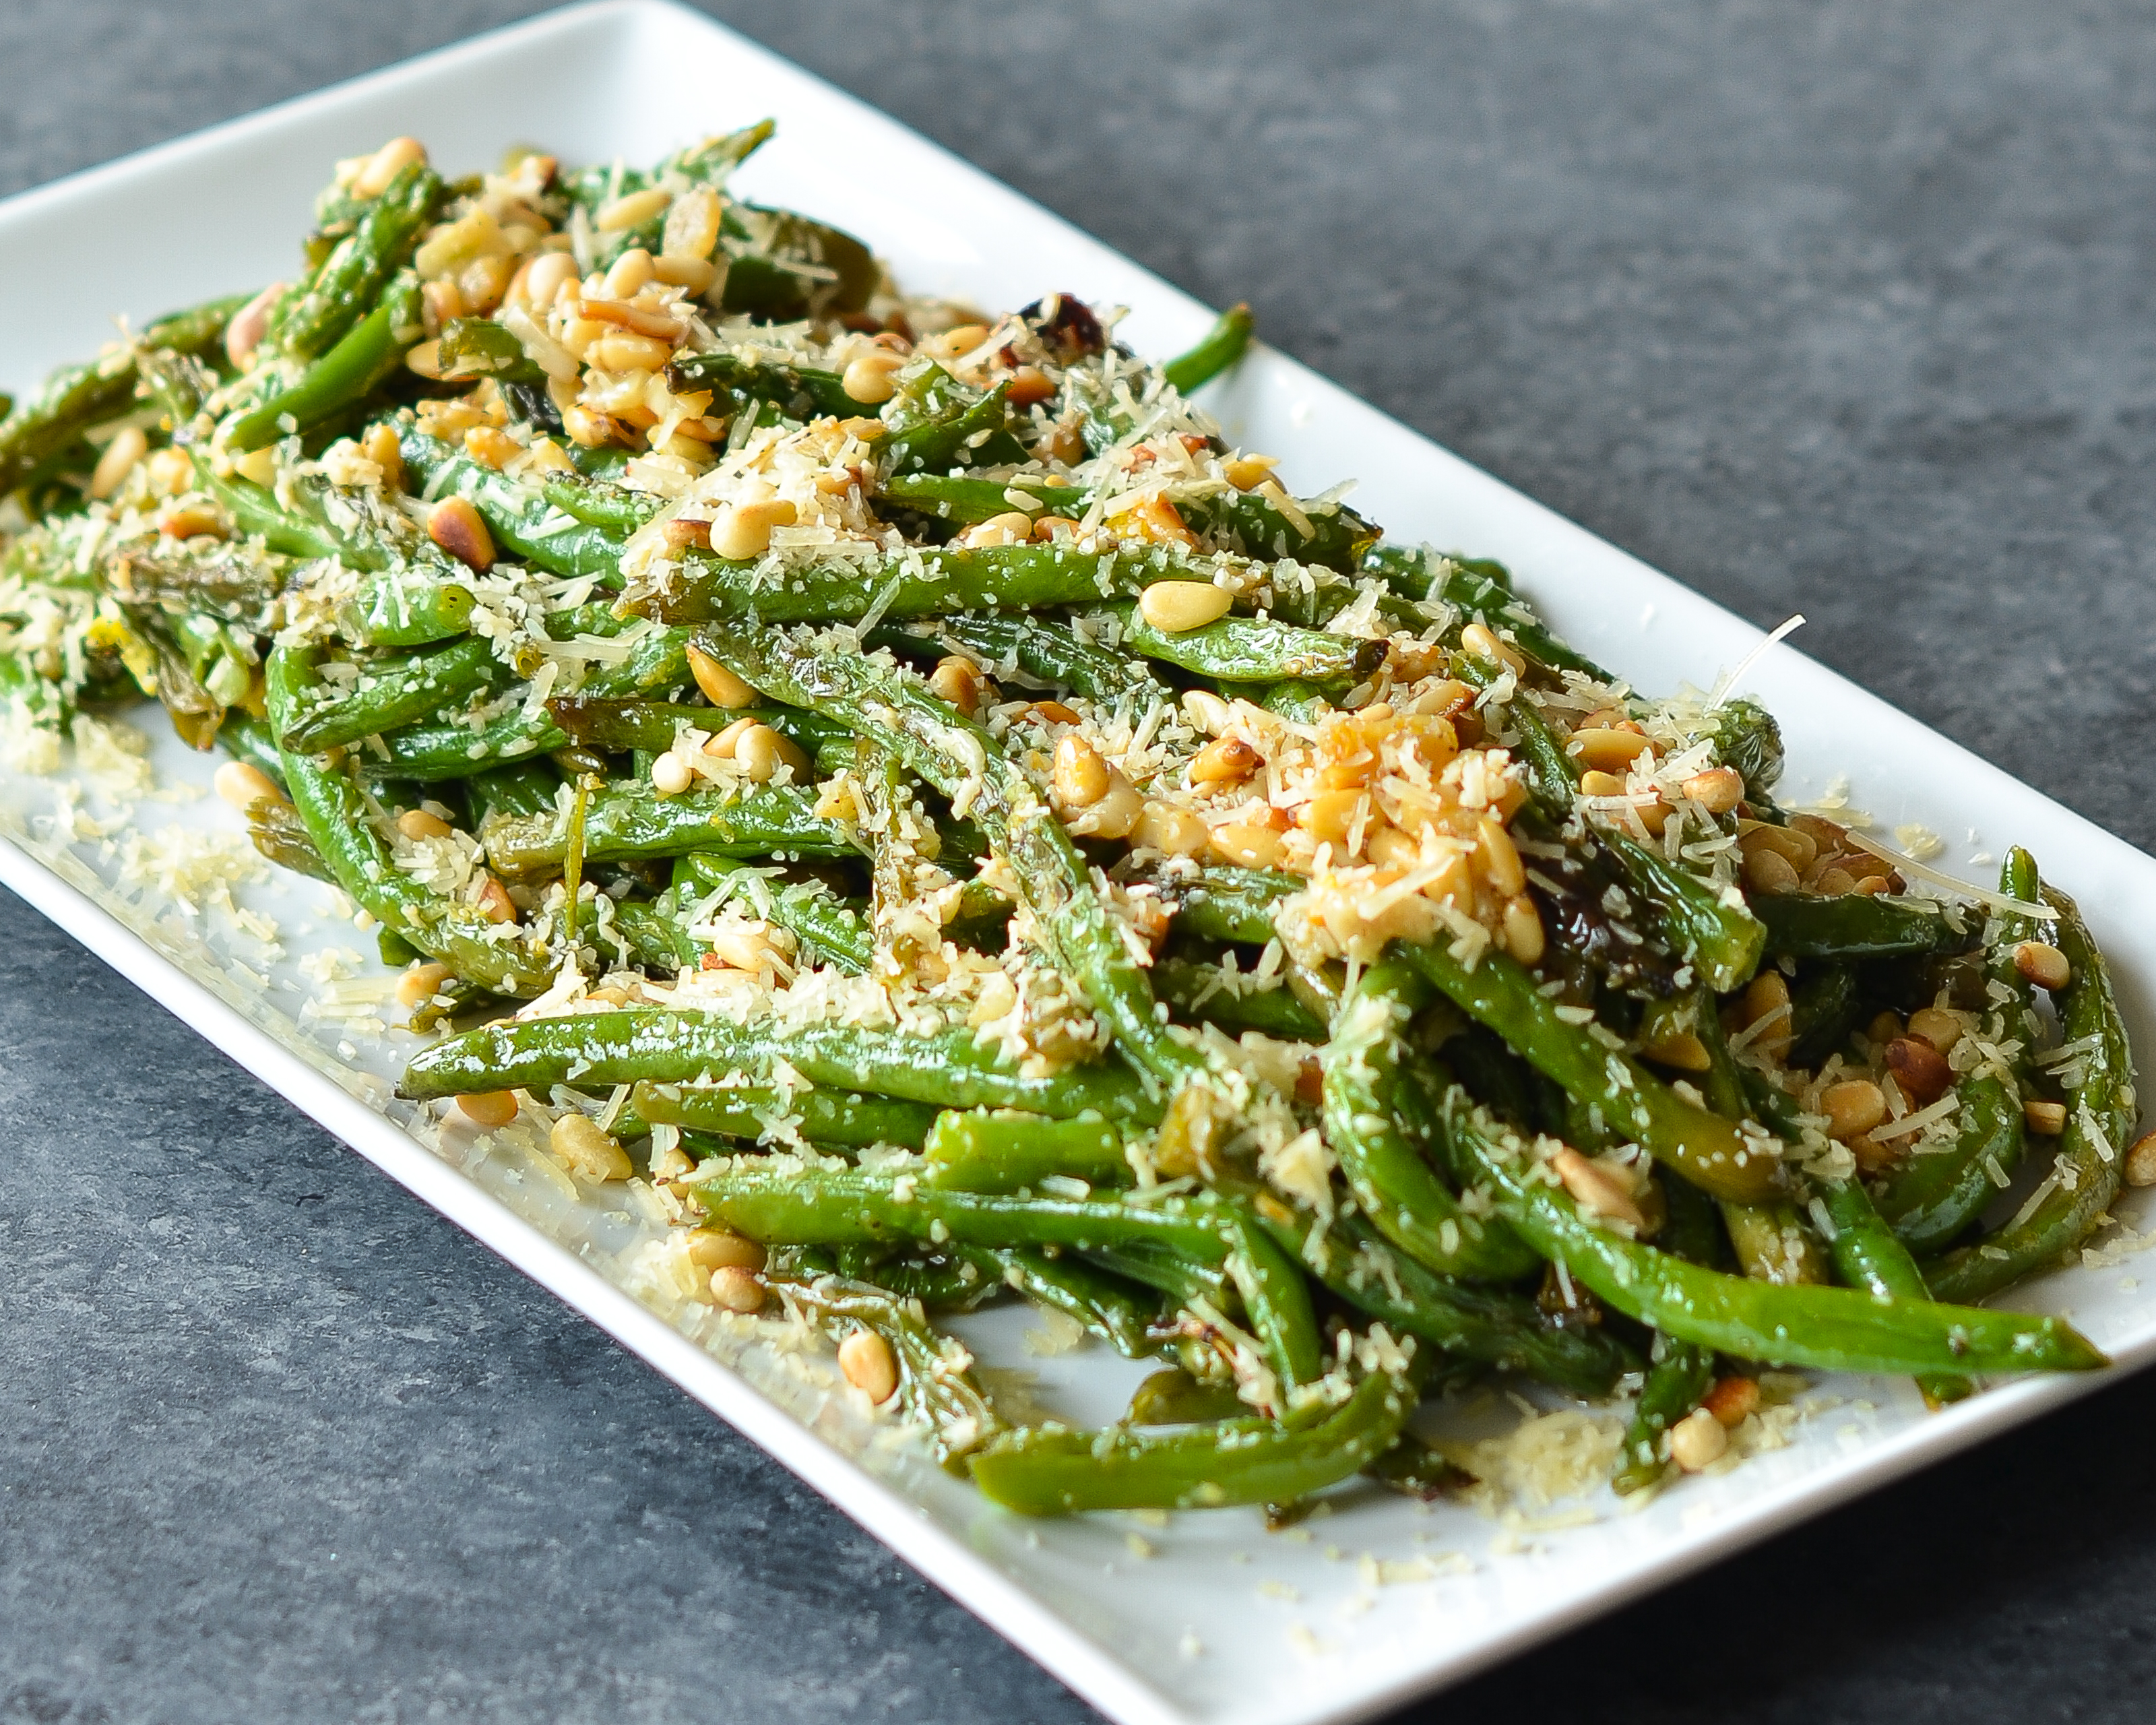 Roasted Green Beans With Garlic Lemon Pine Nuts Parmigiano Reggiano,Etiquette Rules For Zoom Meetings